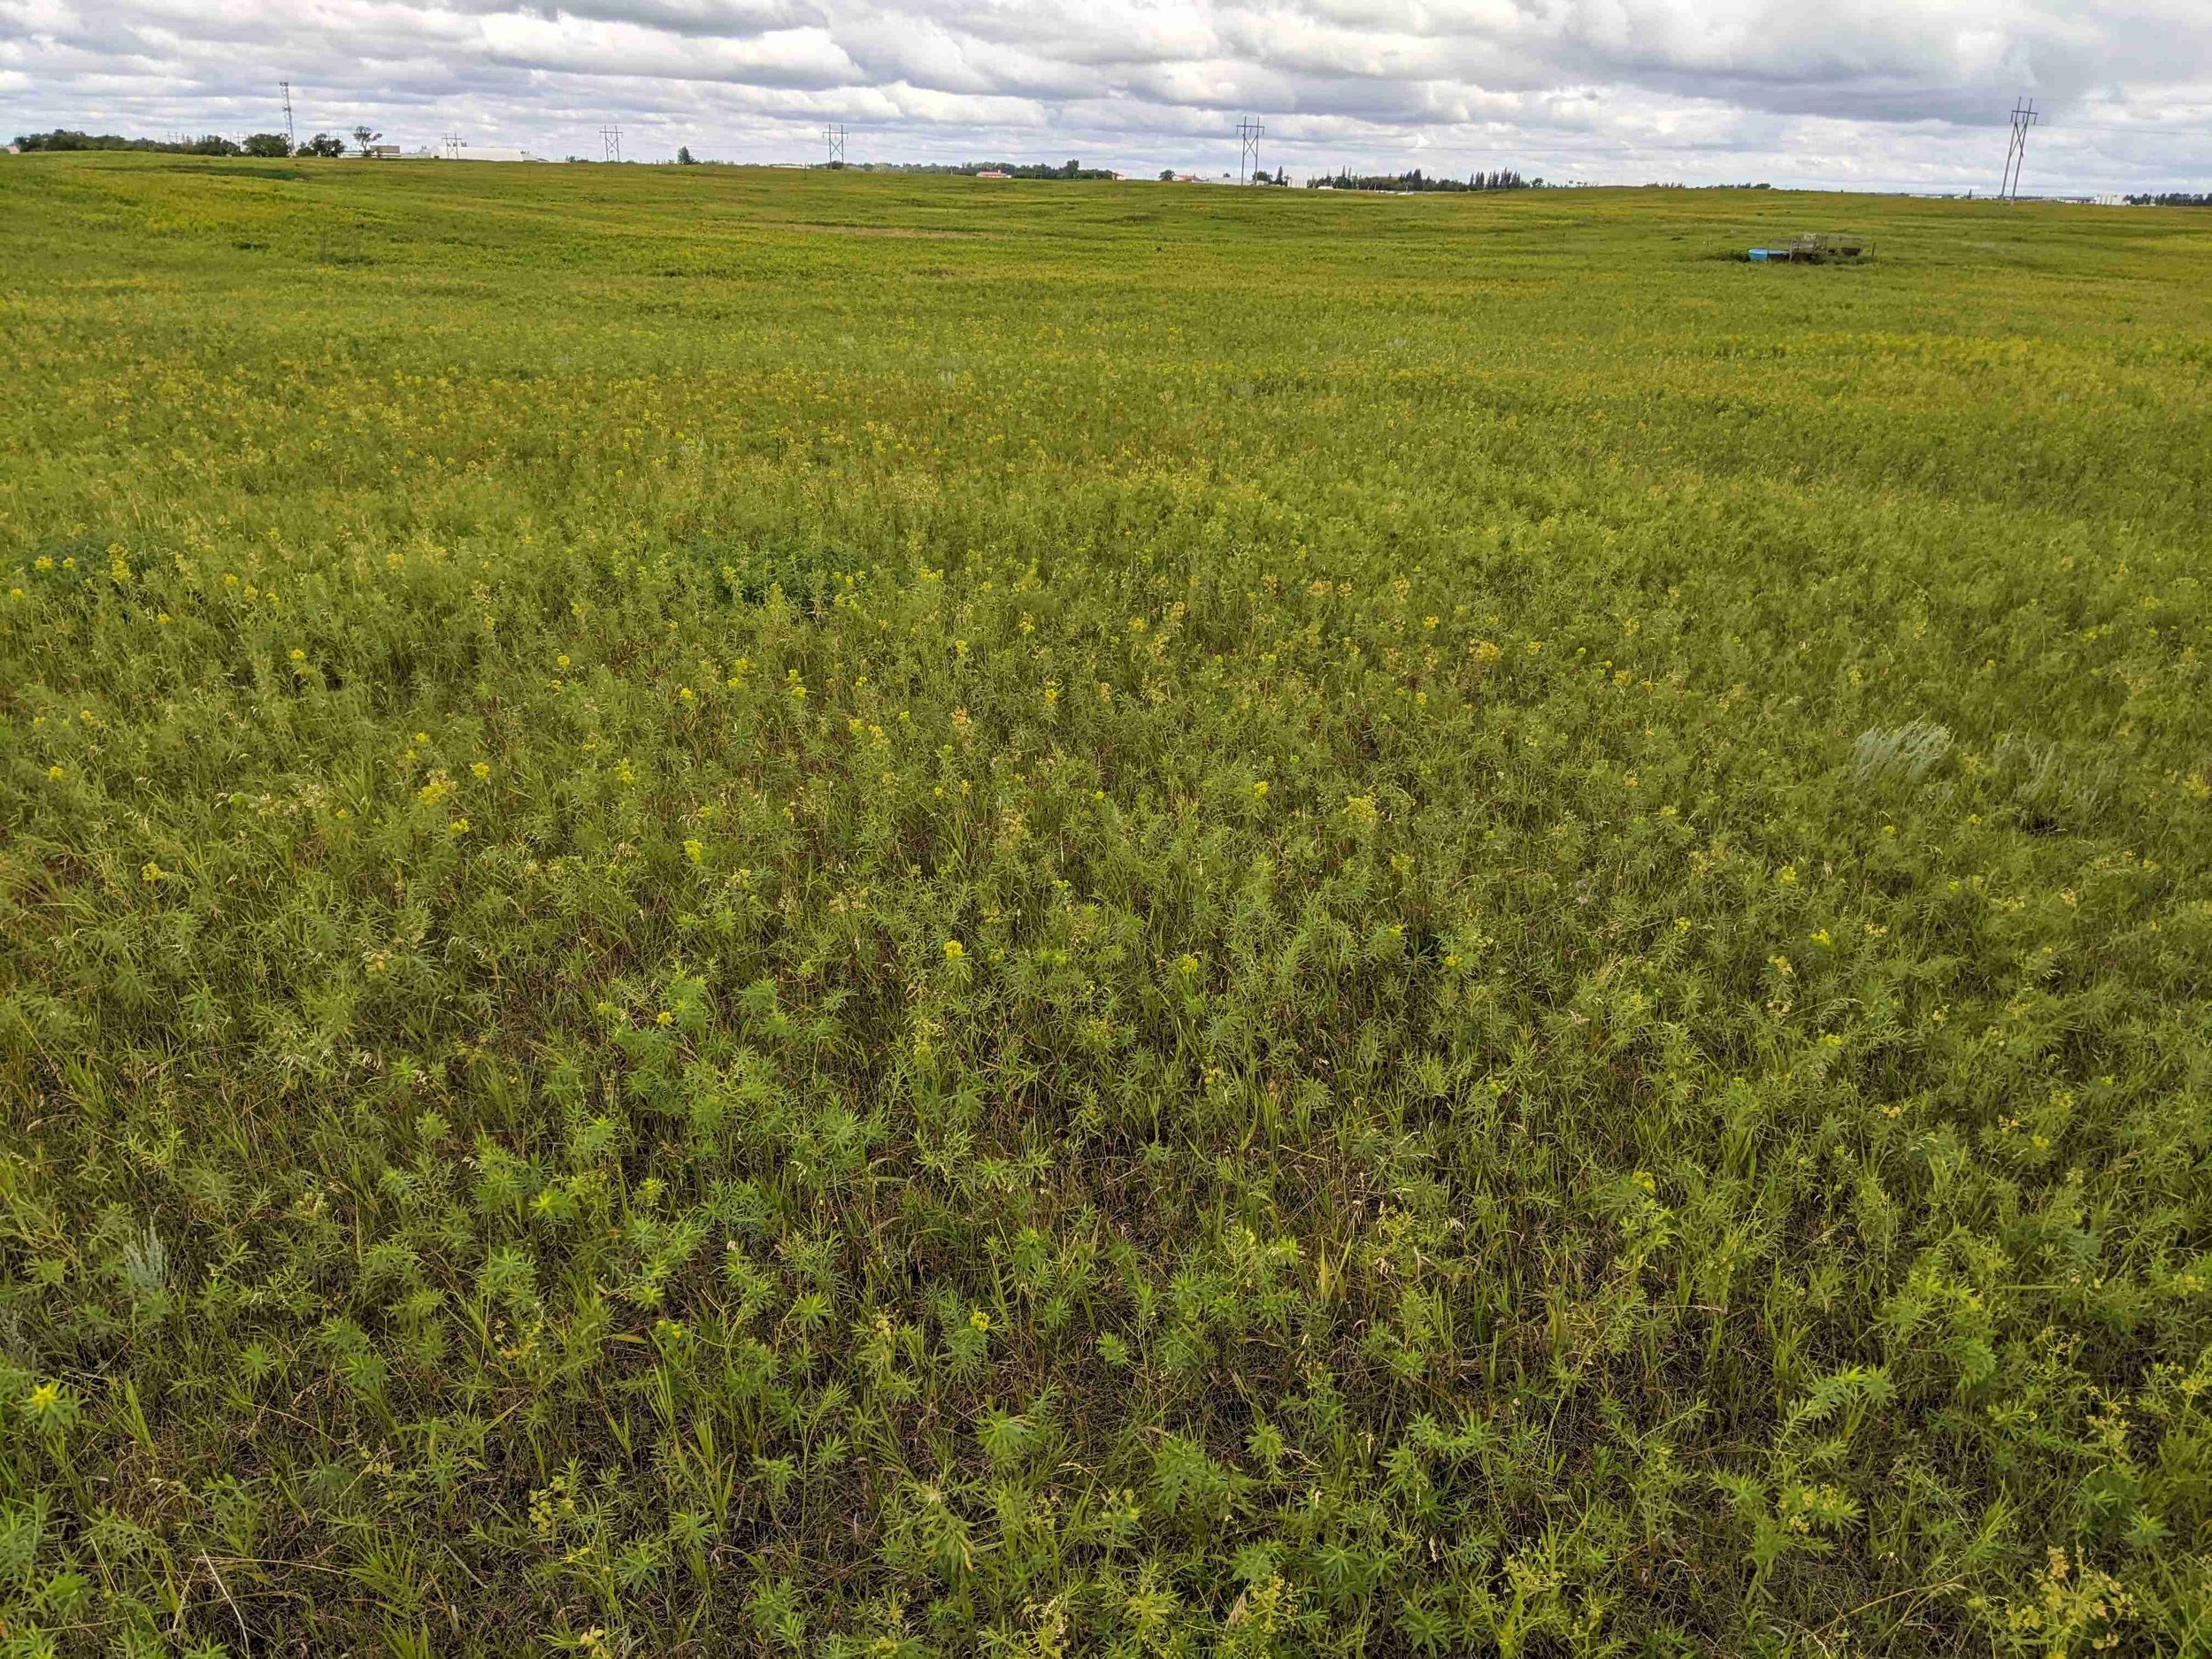 Area of high leafy spurge and low grass selected for intensive management through flea beetle biocontrol